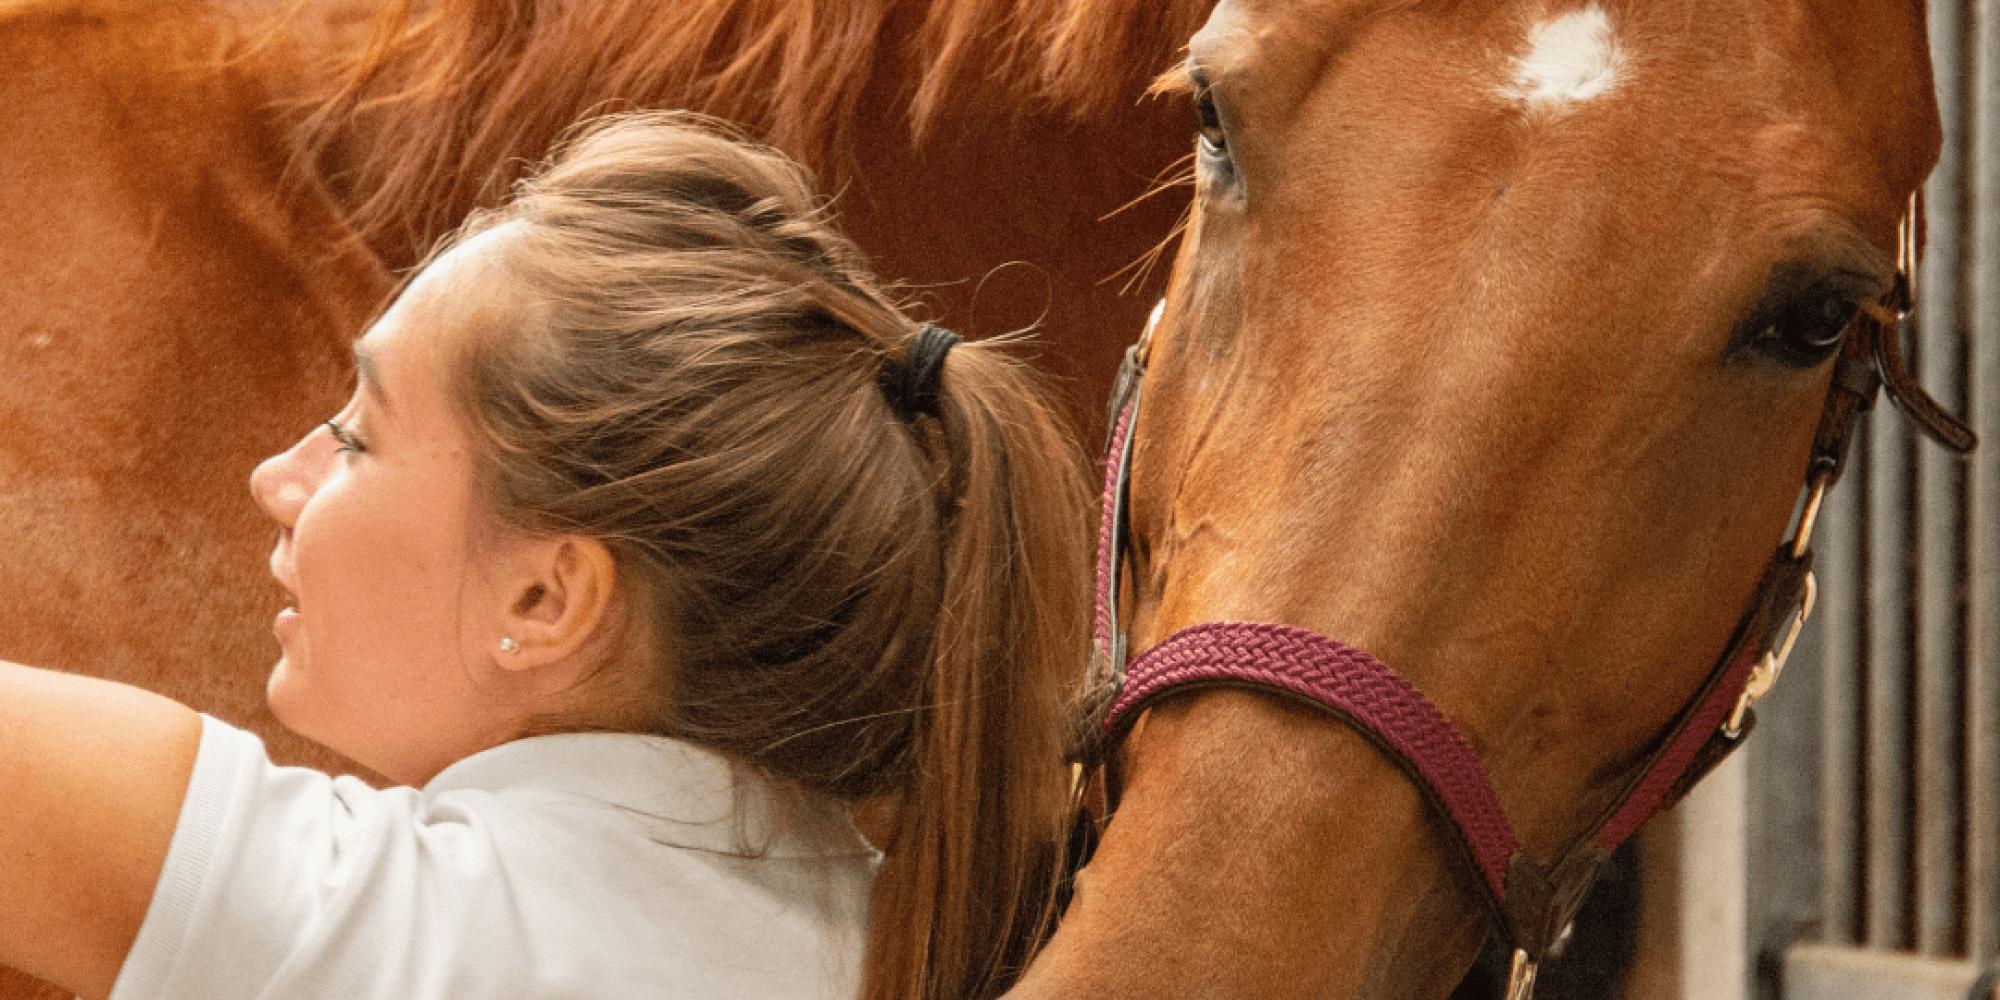 Chestnut horse being brushed by a blonde woman